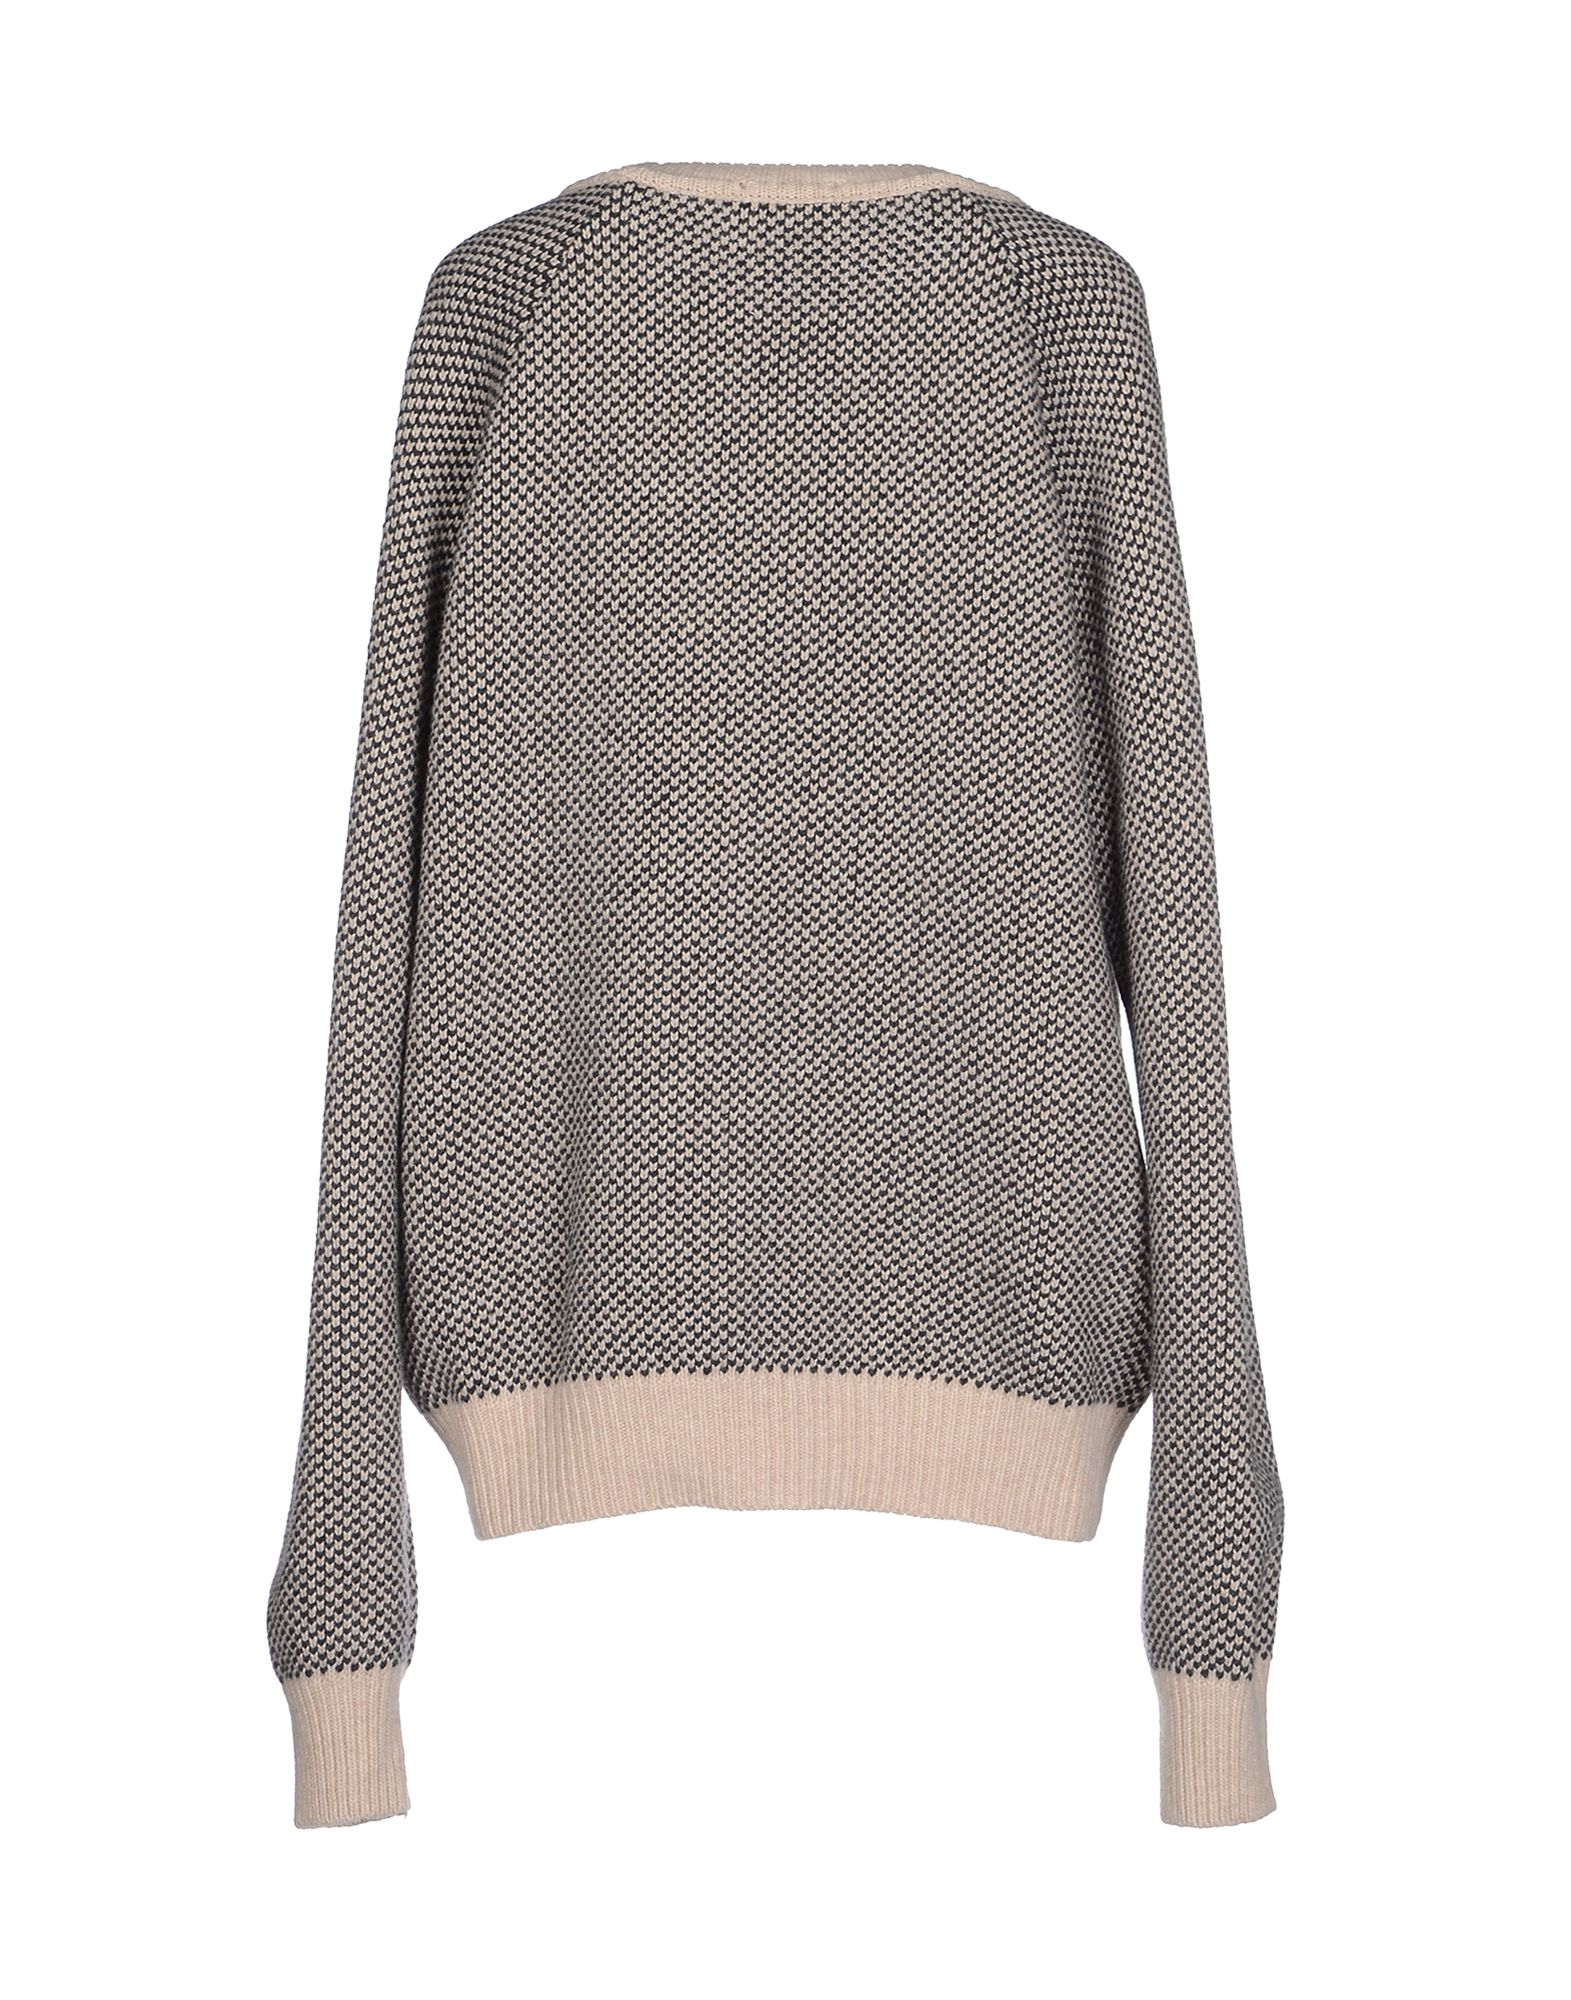 Lyst - Le Mont St Michel Jumper in Gray